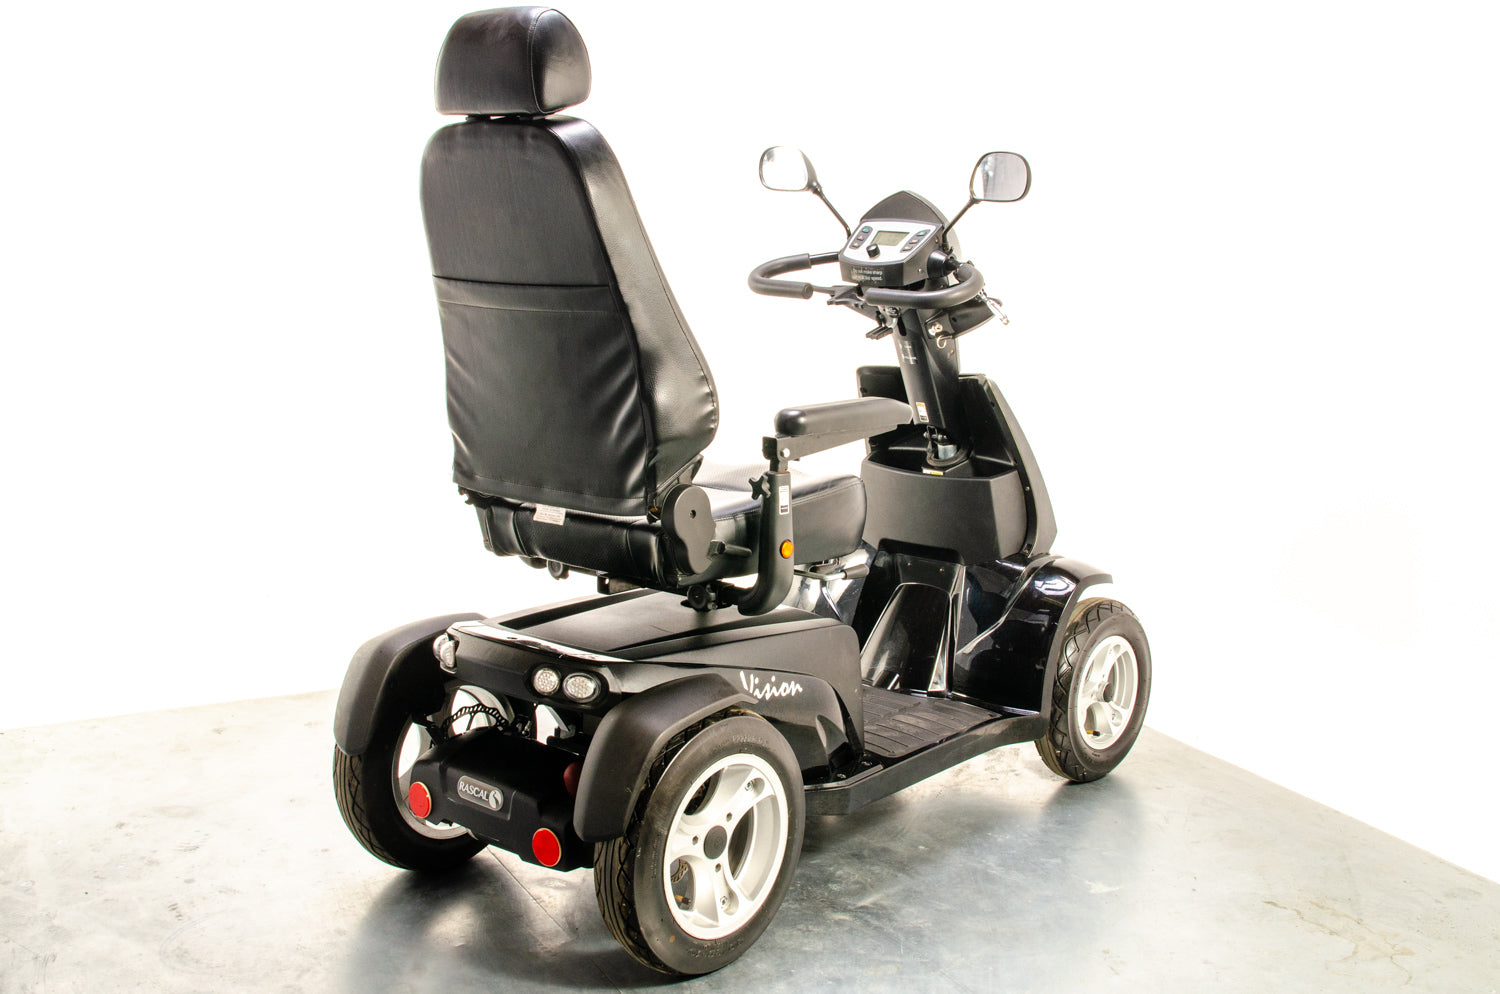 Rascal Vision Used Electric Mobility Scooter 8mph Large All-Terrain Road Legal Black Pneumatic Tyres 13282